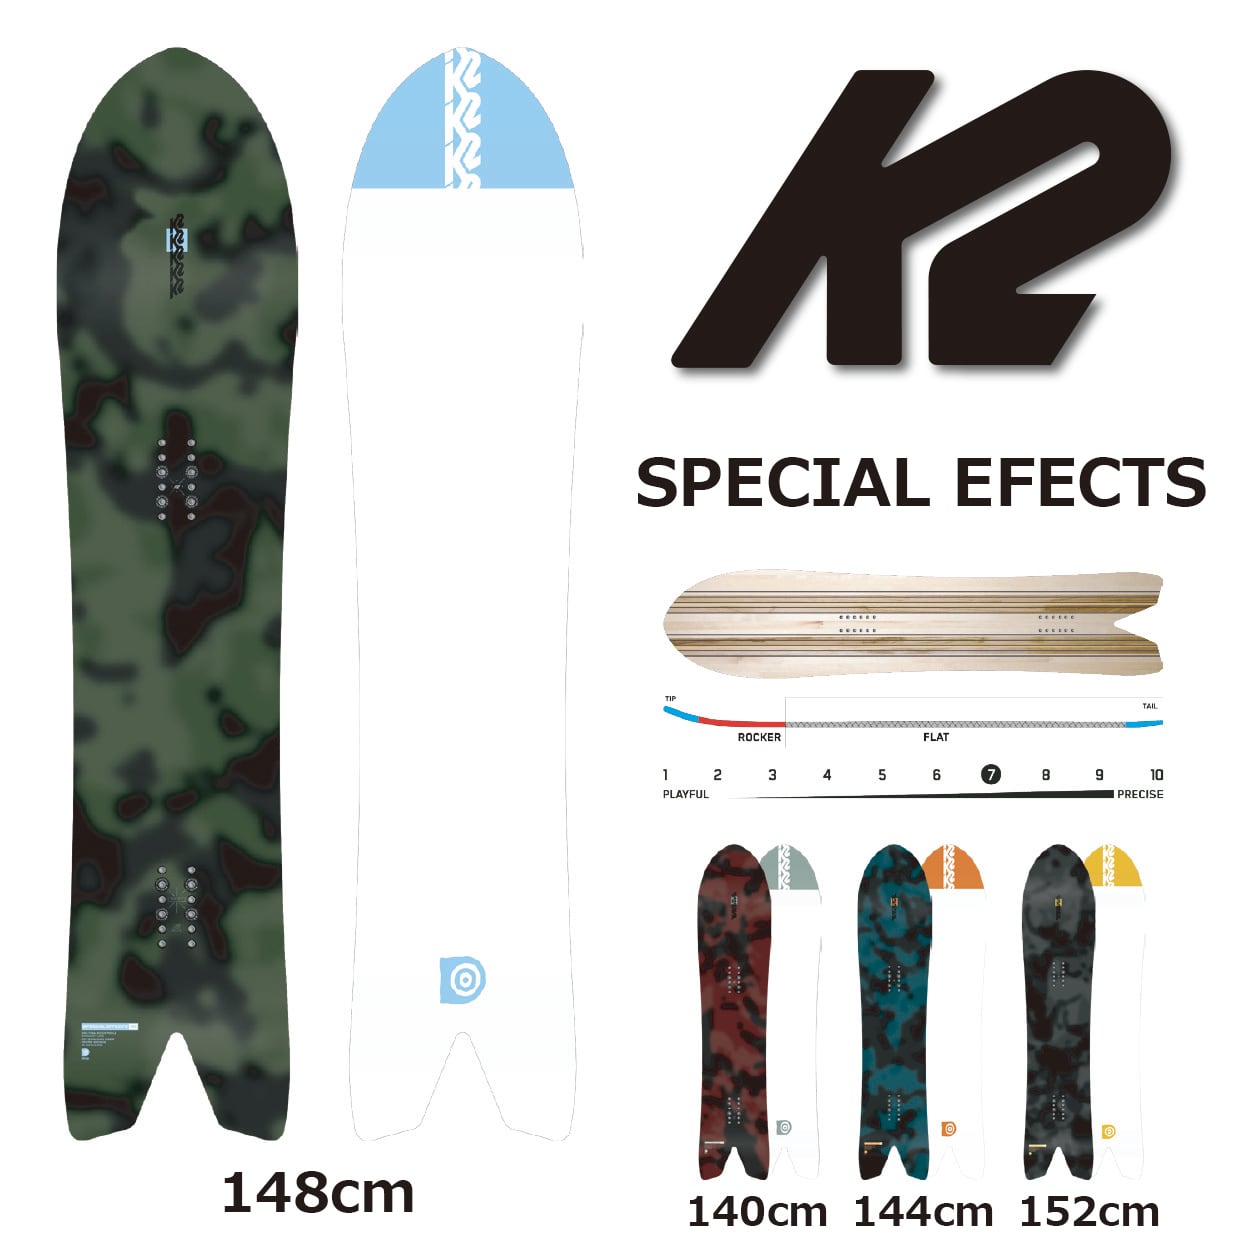 K2 21-22 SPECIAL EFFECTS 147cm ケーツー